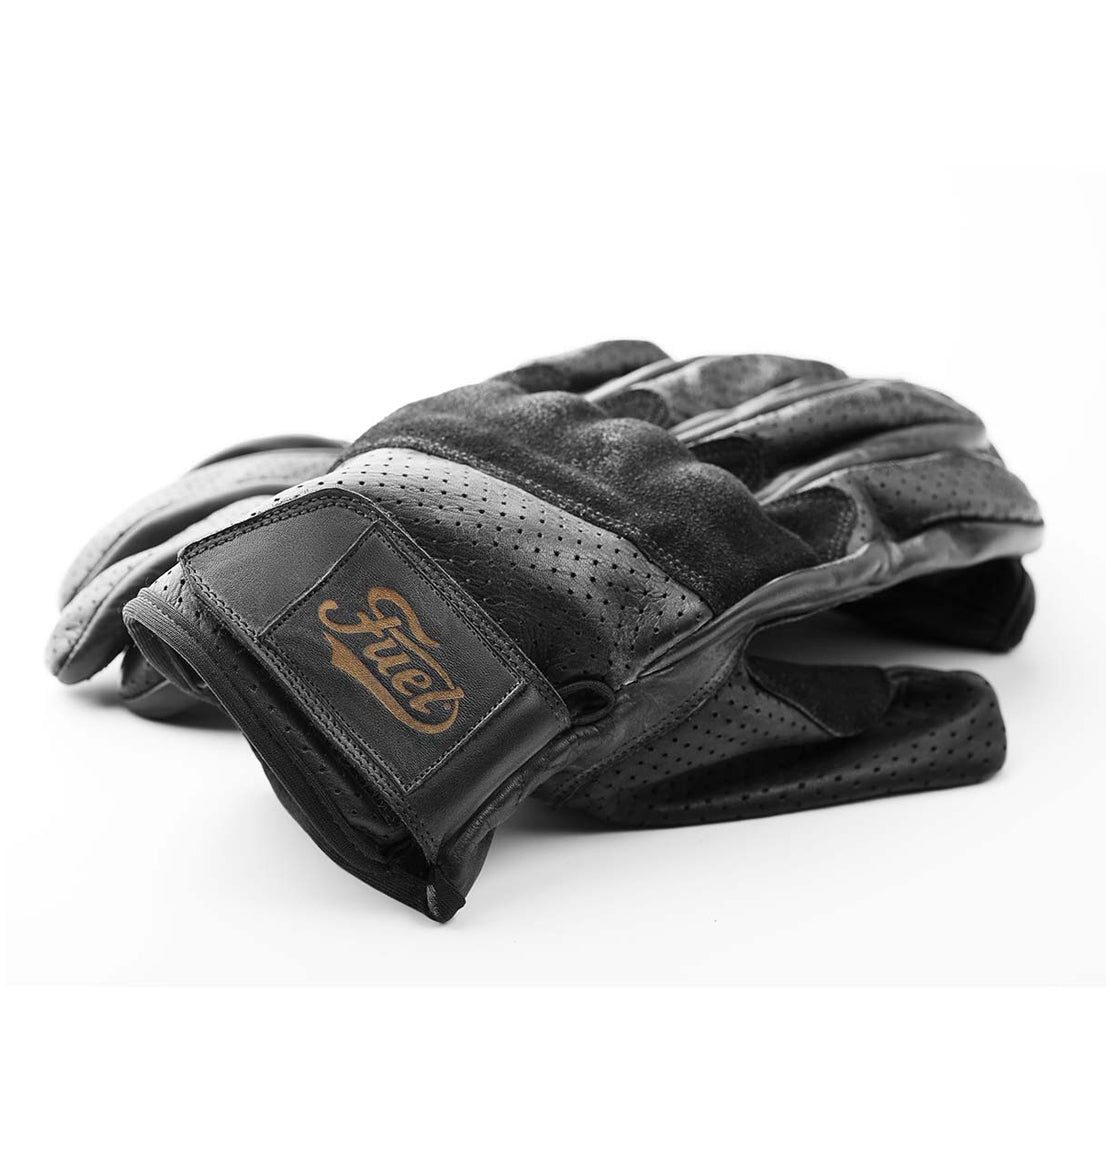 Fuel rodeo gloves black leicester